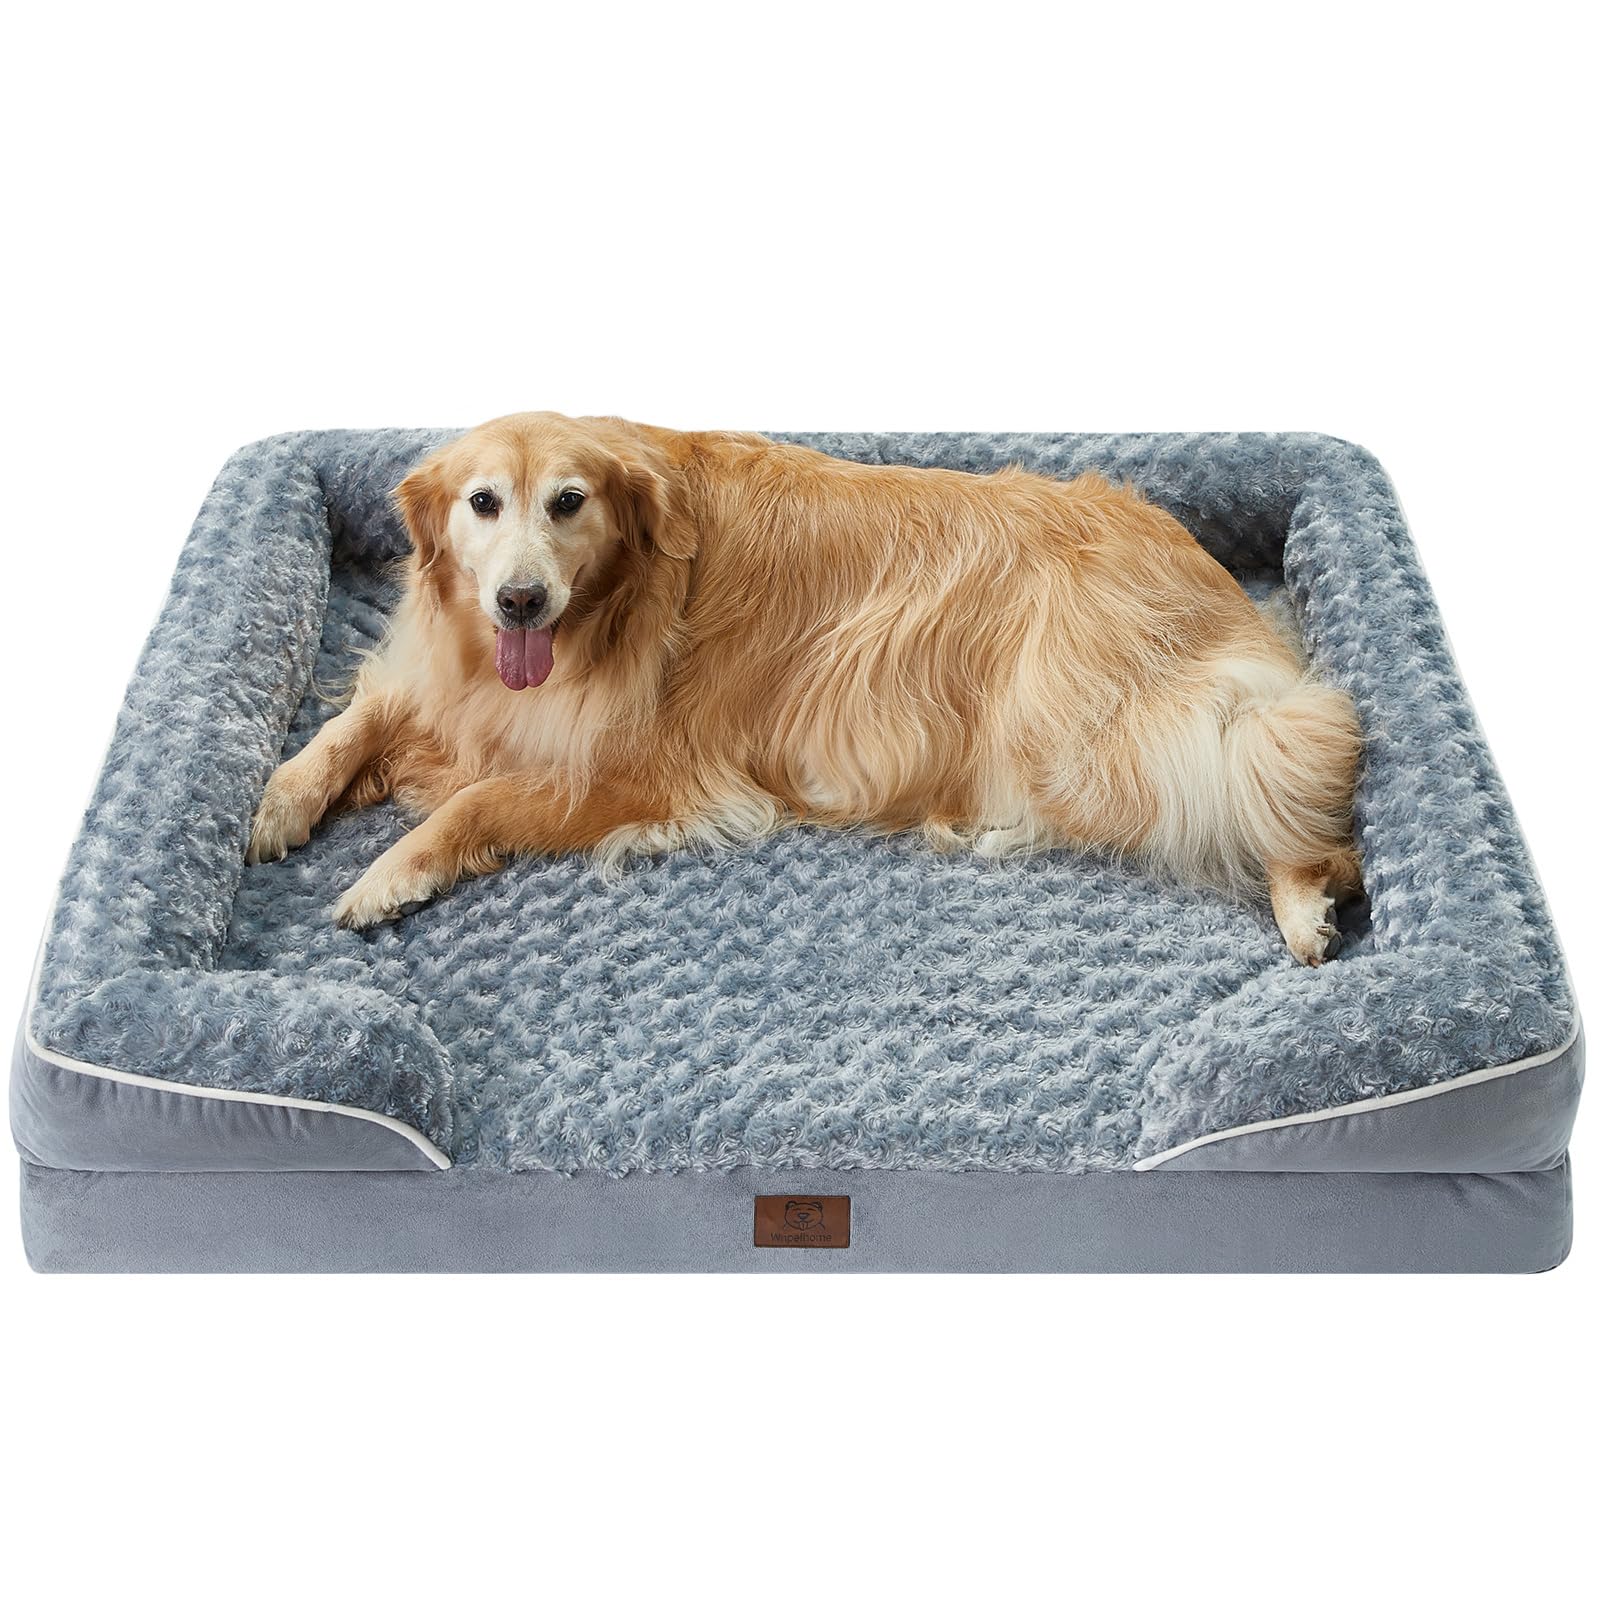 WNPETHOME Dog Beds for Large Dogs